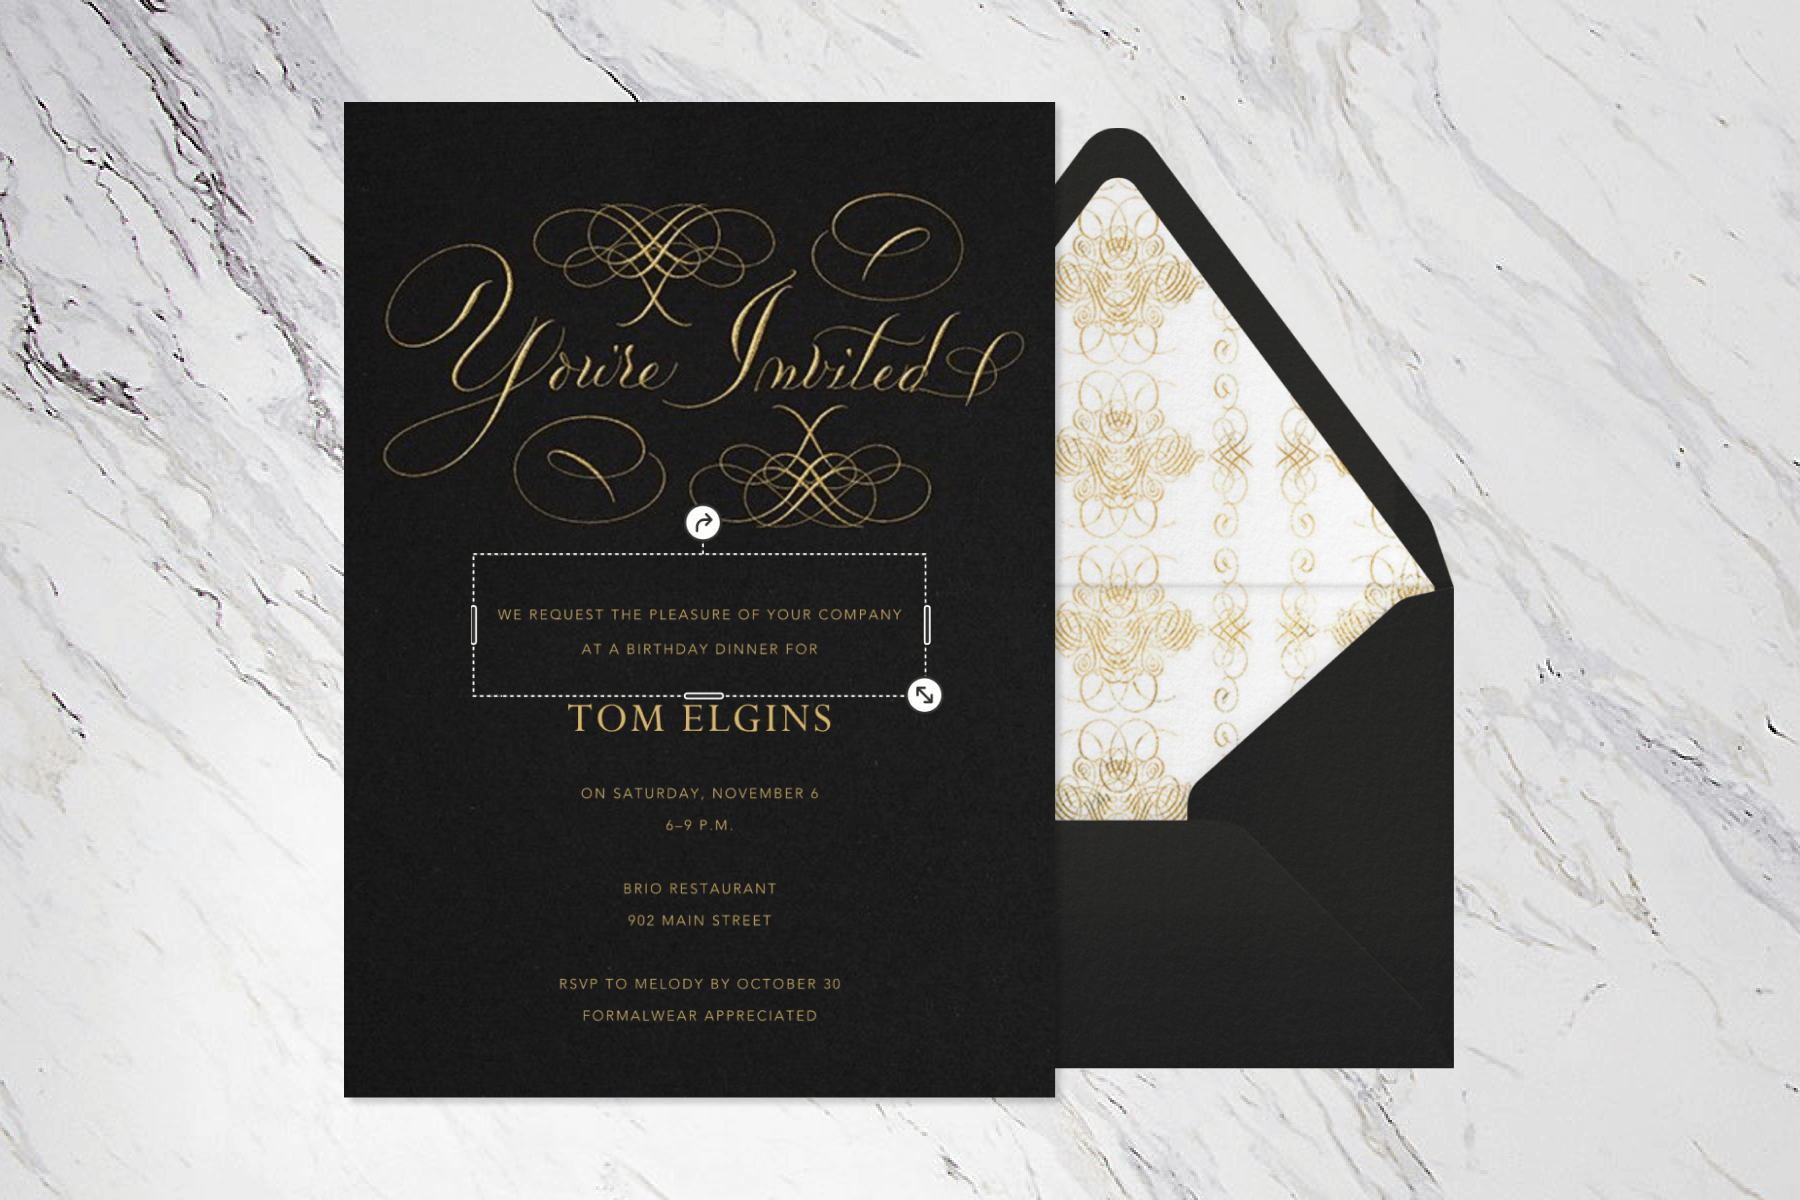 A black and gold invitation with the words “You’re Invited” in calligraphic text.